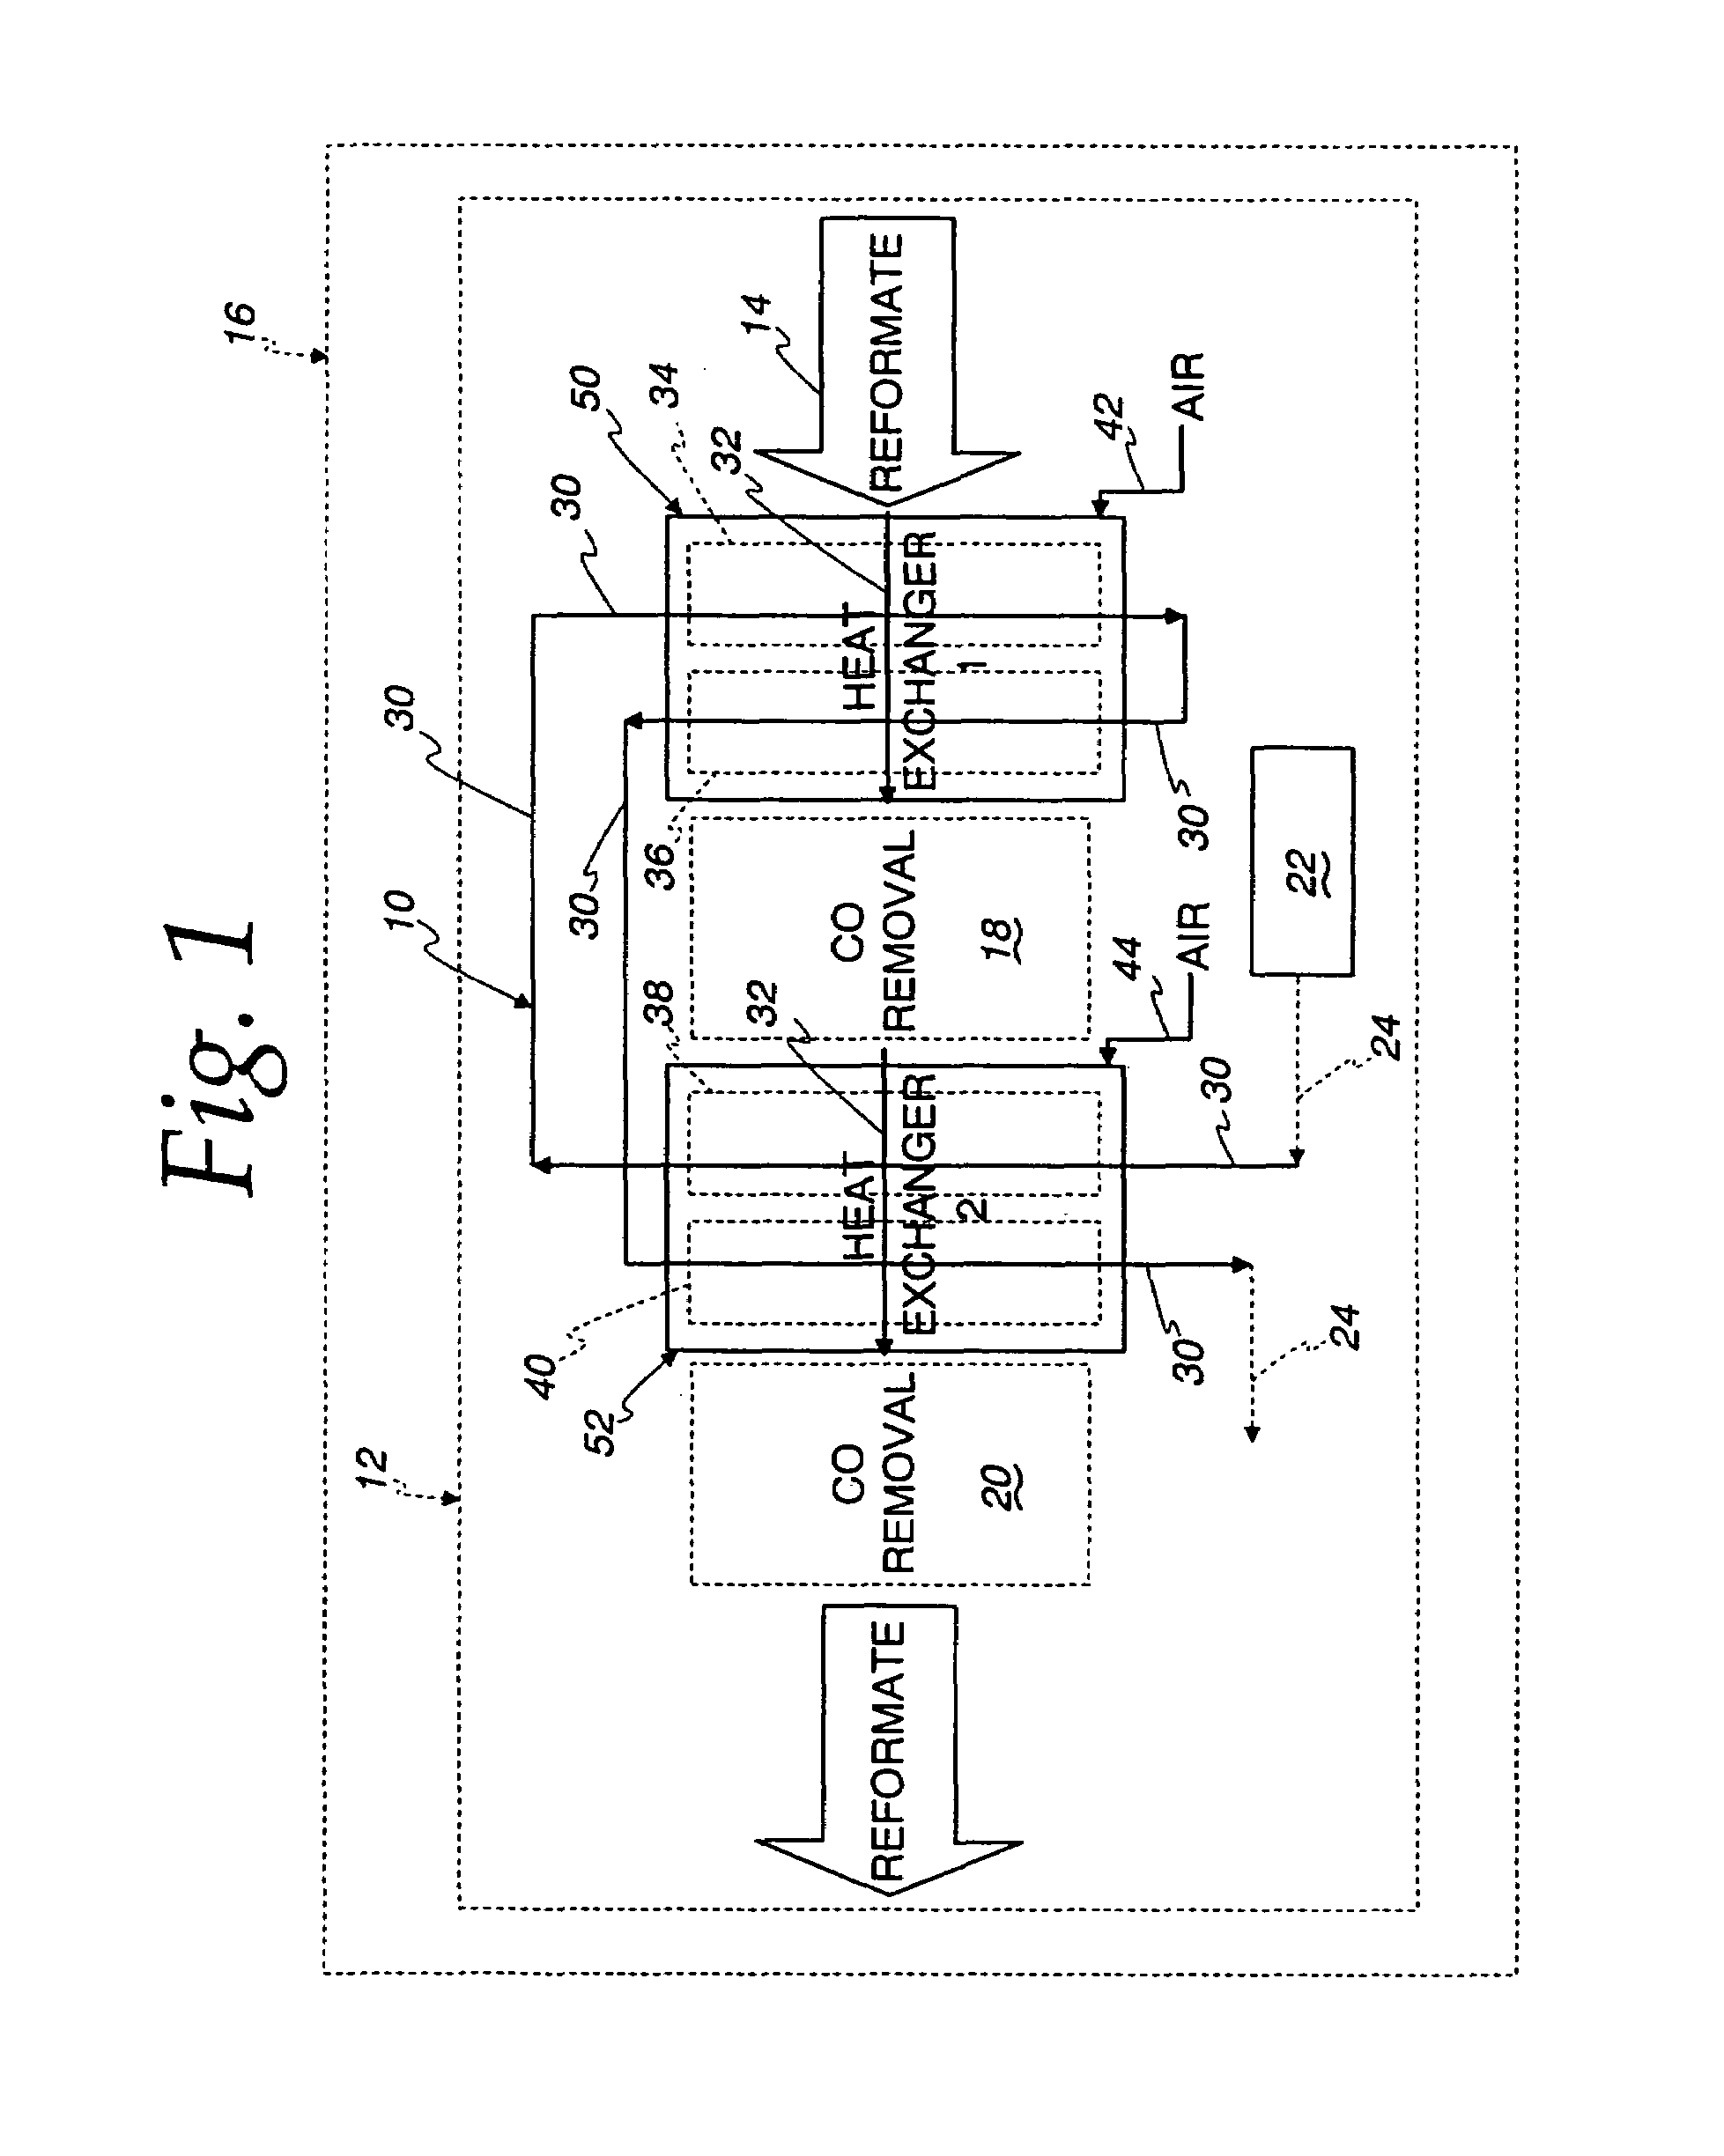 Reformate cooling system and method for use in a fuel processing subsystem